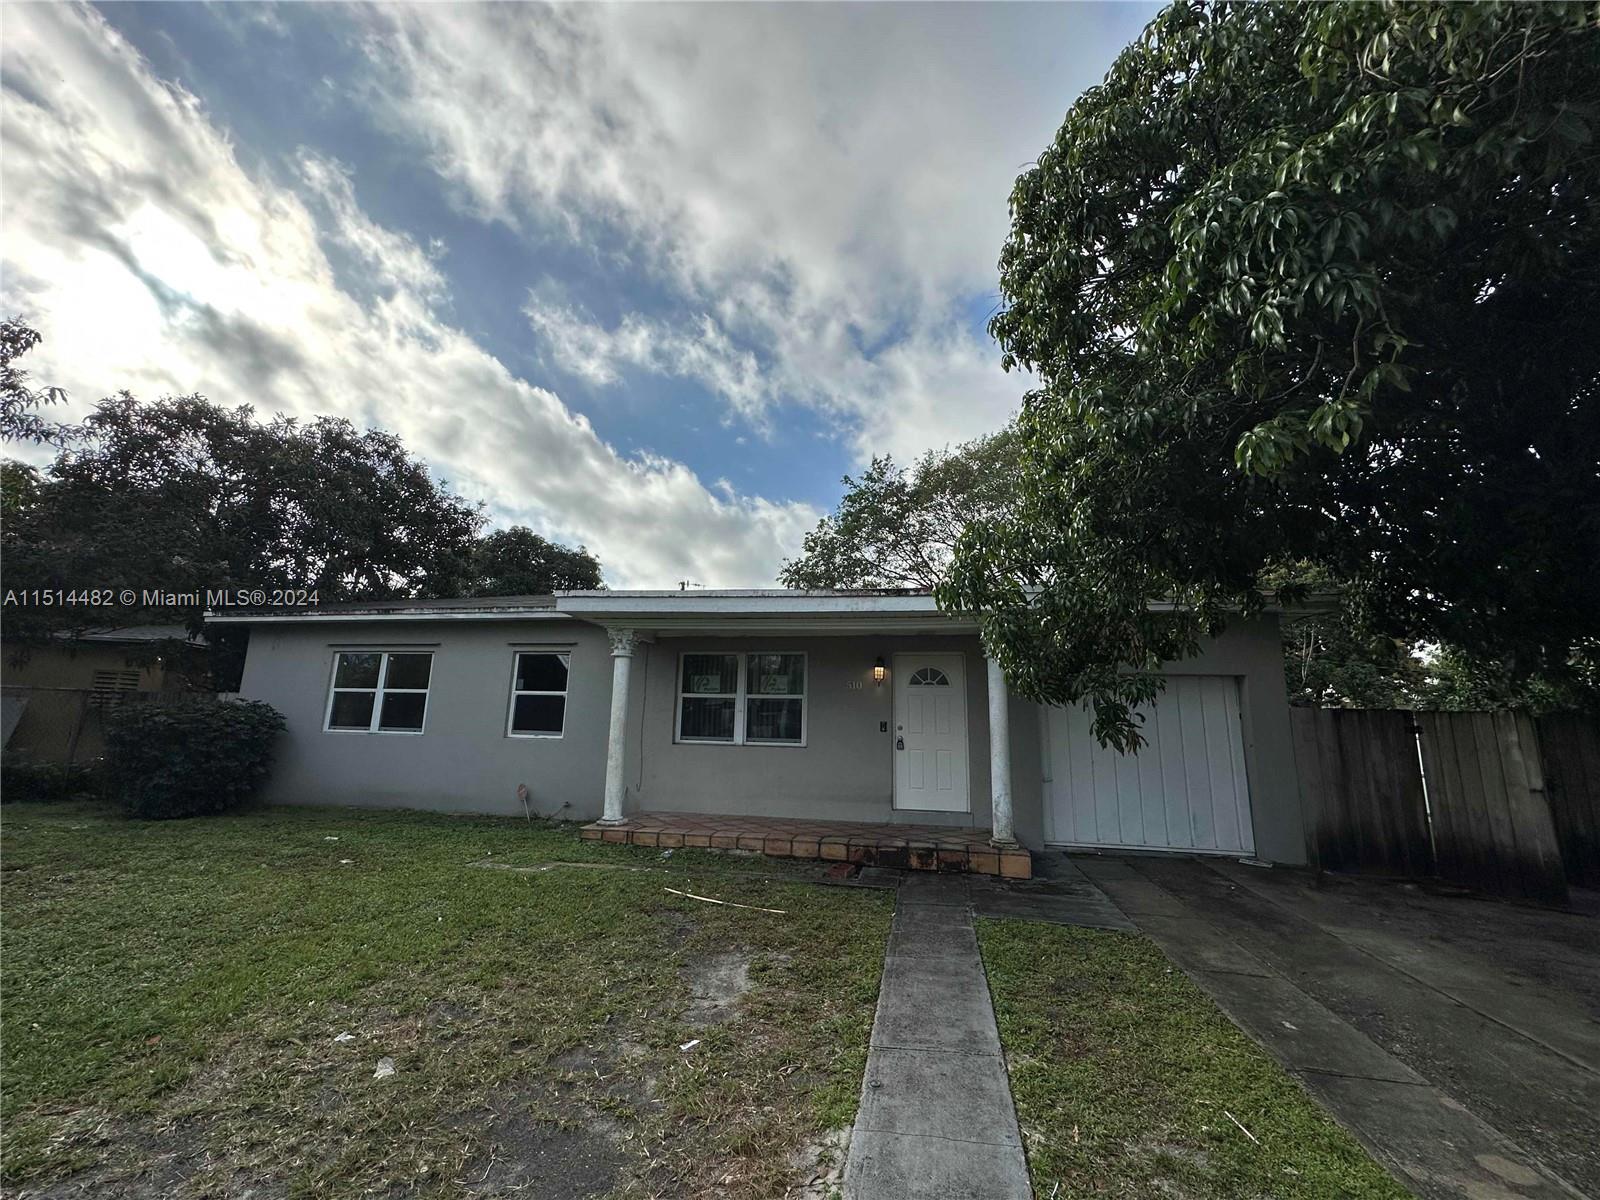 510 NW 152nd St, Miami, Florida 33169, 3 Bedrooms Bedrooms, ,2 BathroomsBathrooms,Residential,For Sale,510 NW 152nd St,A11514482